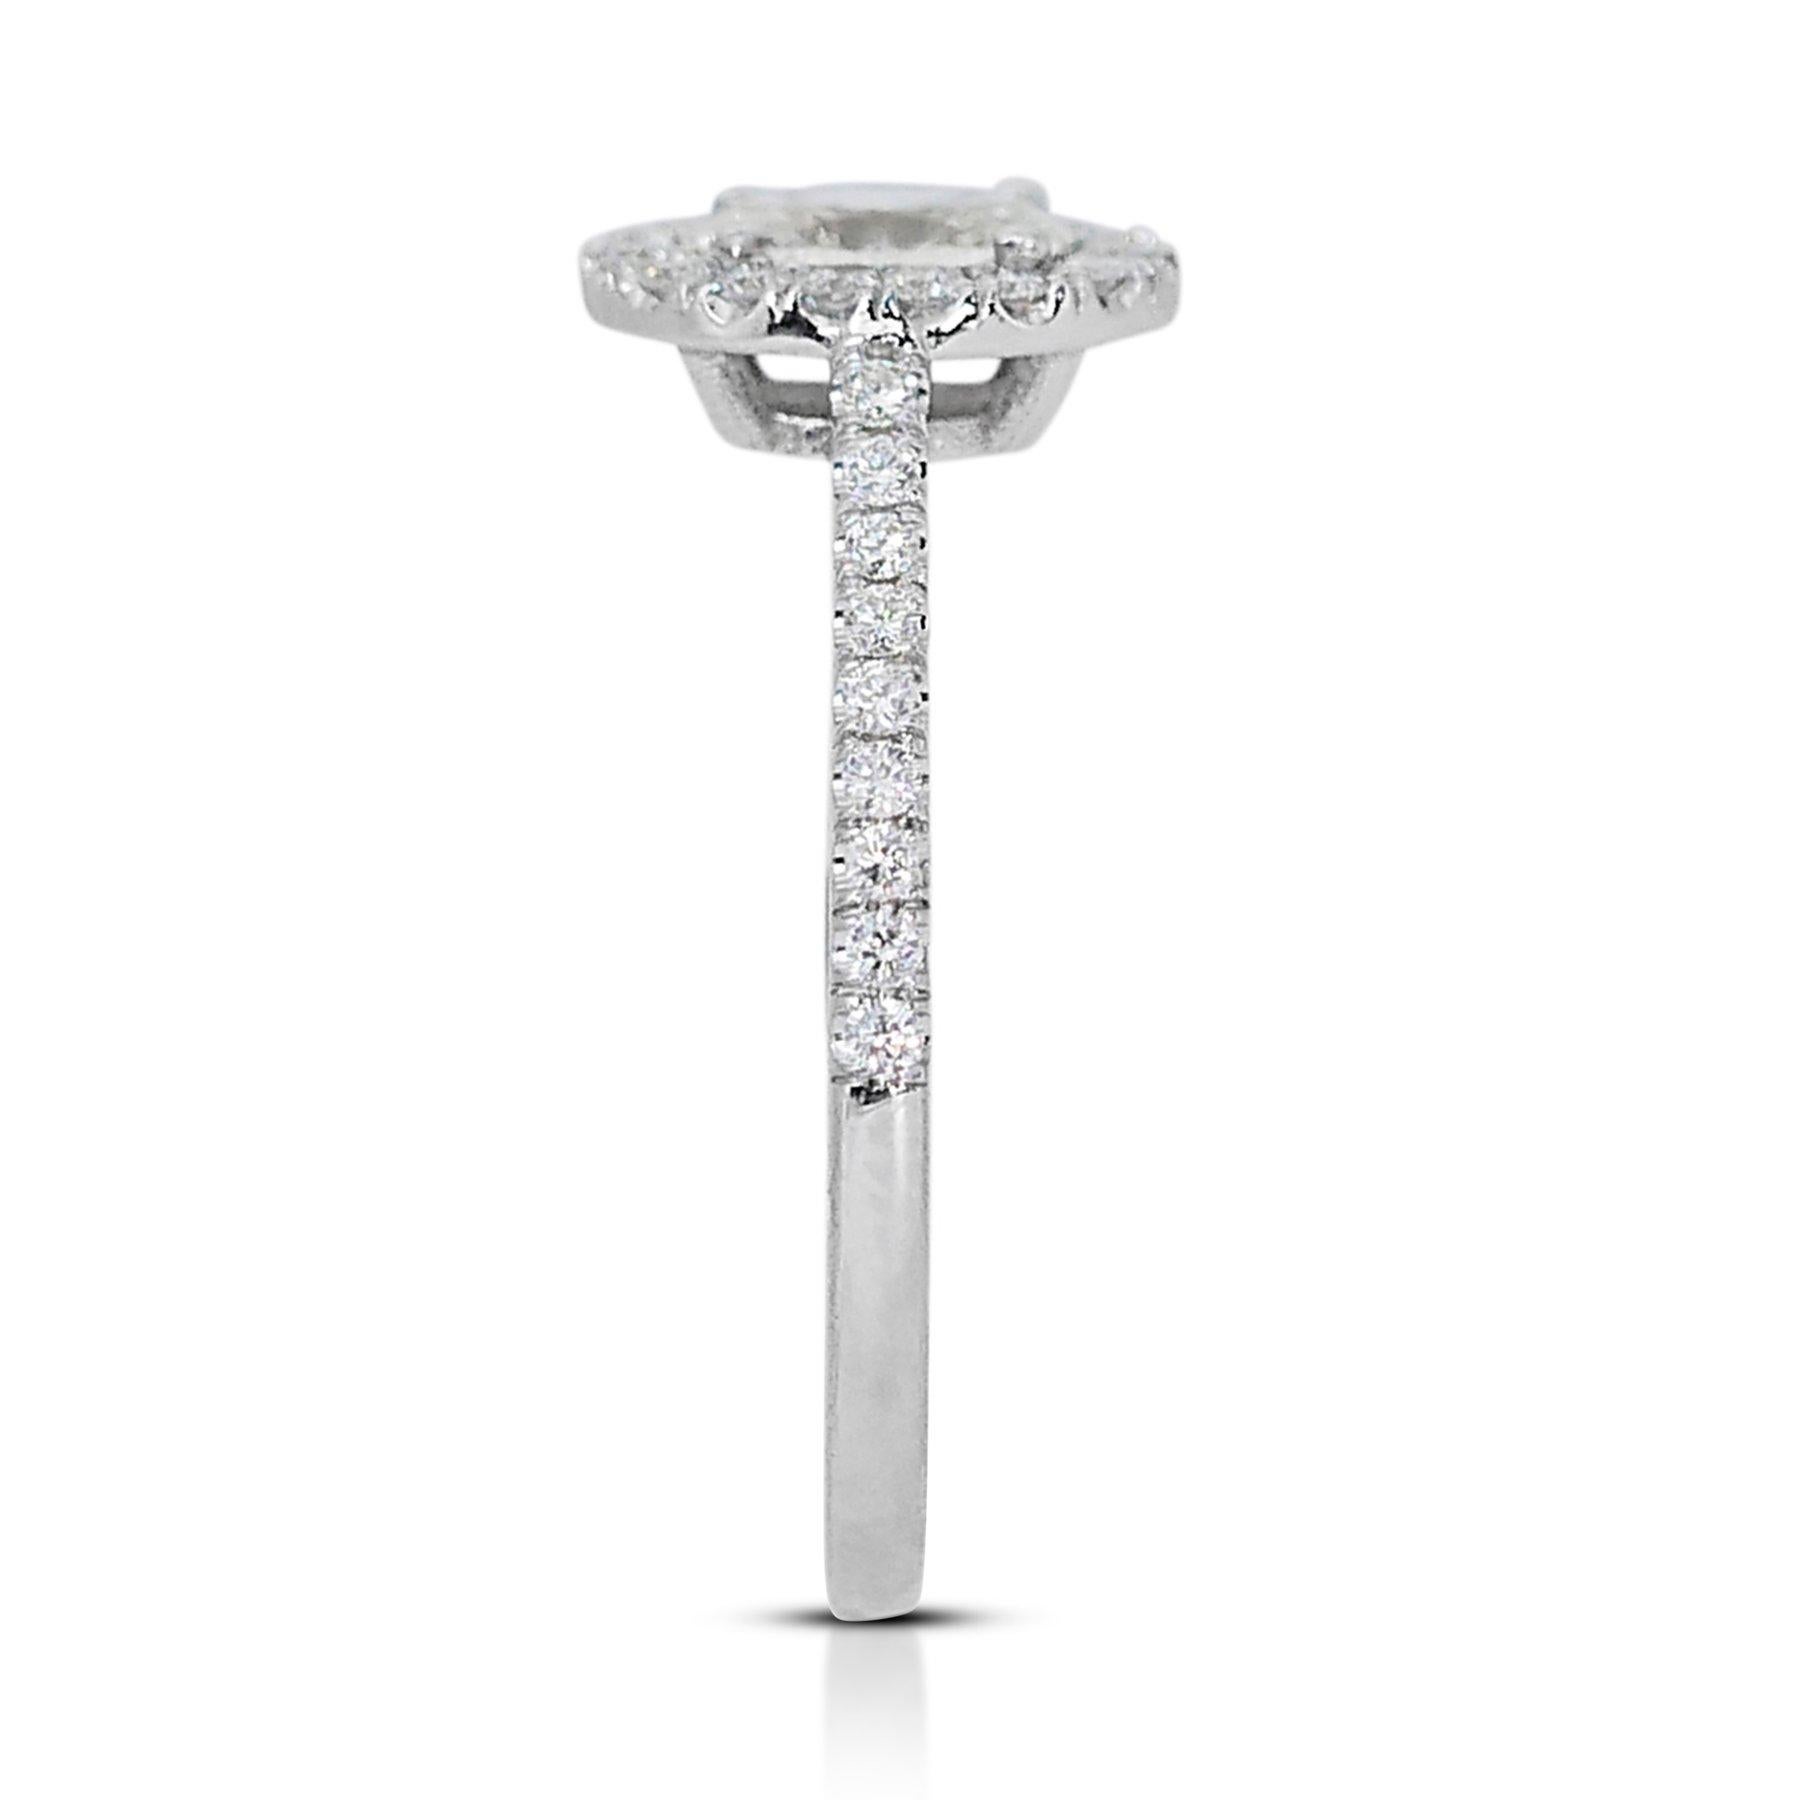 Captivating 1.01 ct Oval Diamond Halo Ring in 18k White Gold – GIA Certified For Sale 1